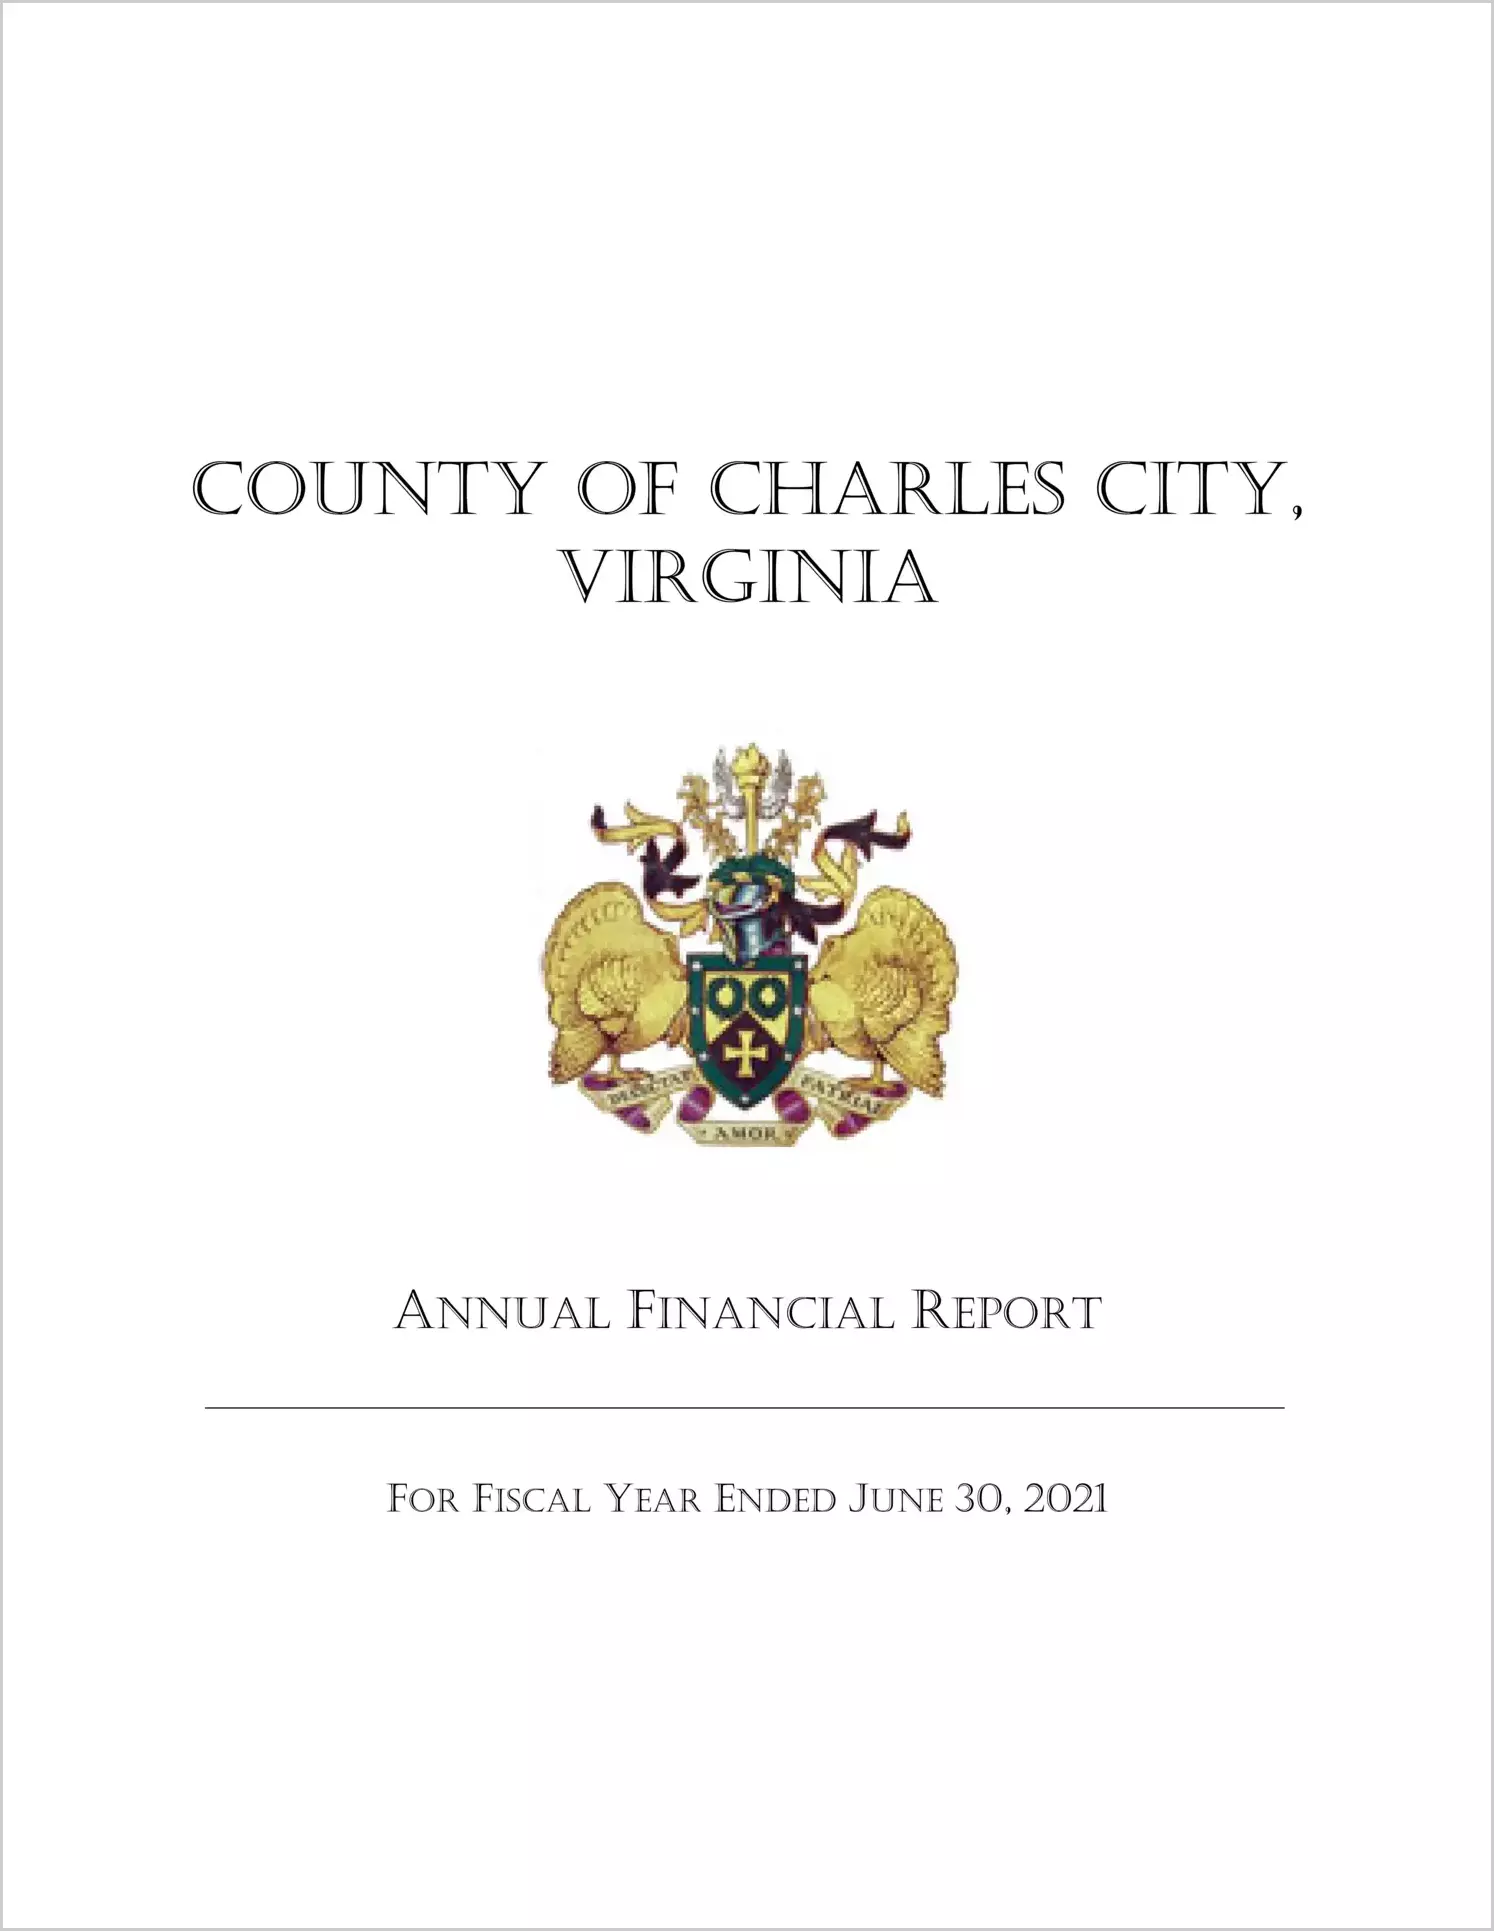 2021 Annual Financial Report for County of Charles City